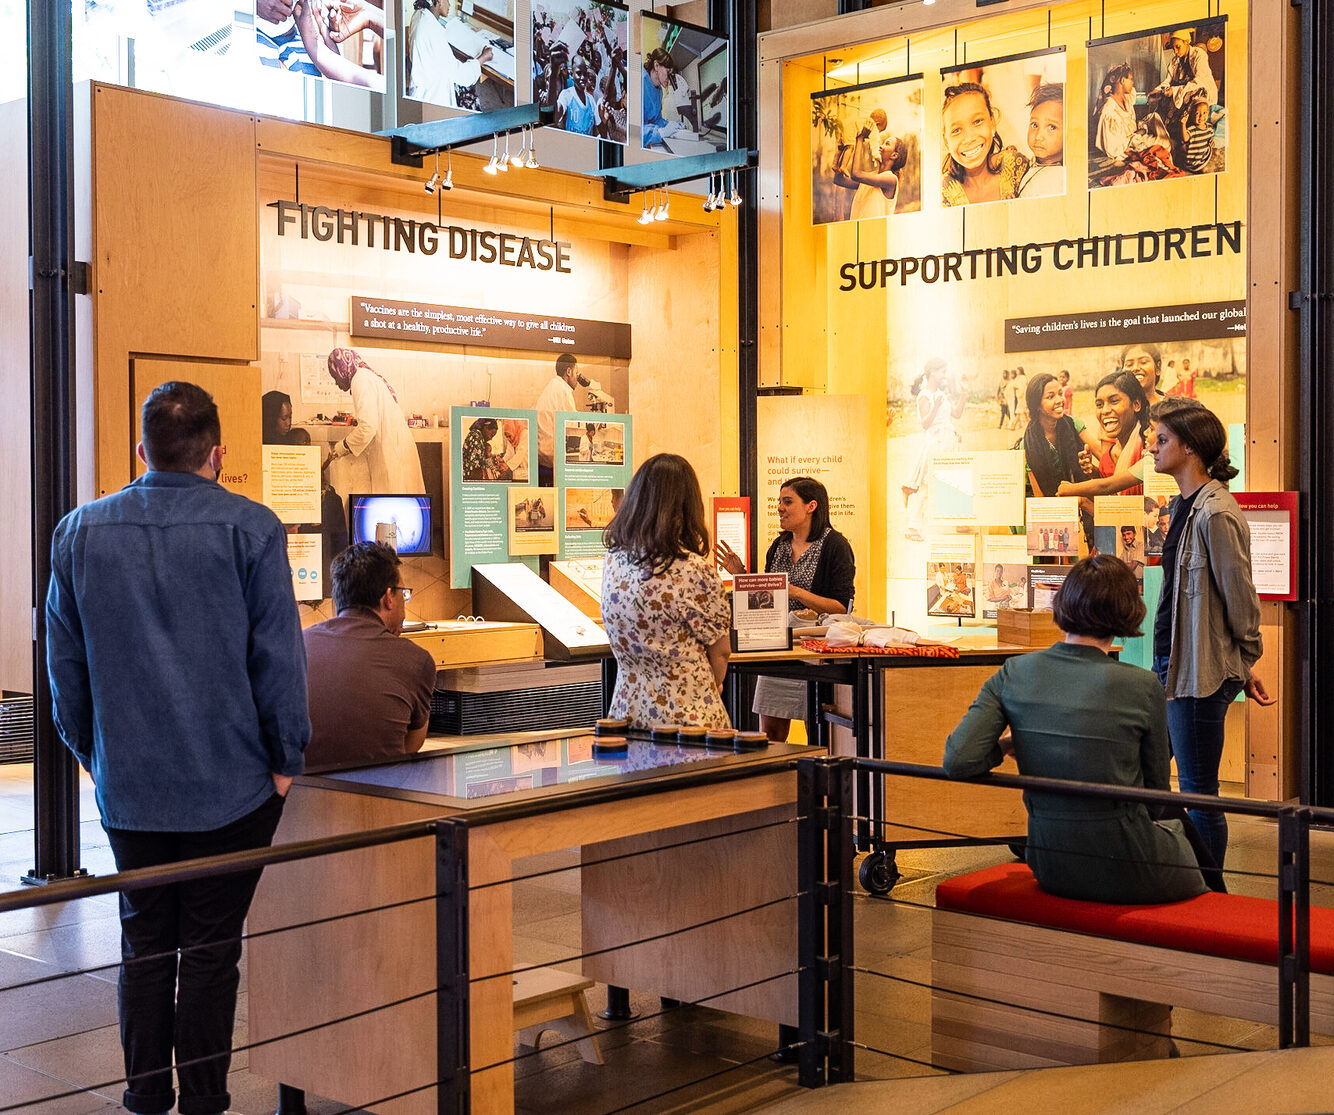 Visitors listen to a speaker during a guided tour at the Bill and Melinda Gates Discovery Center.